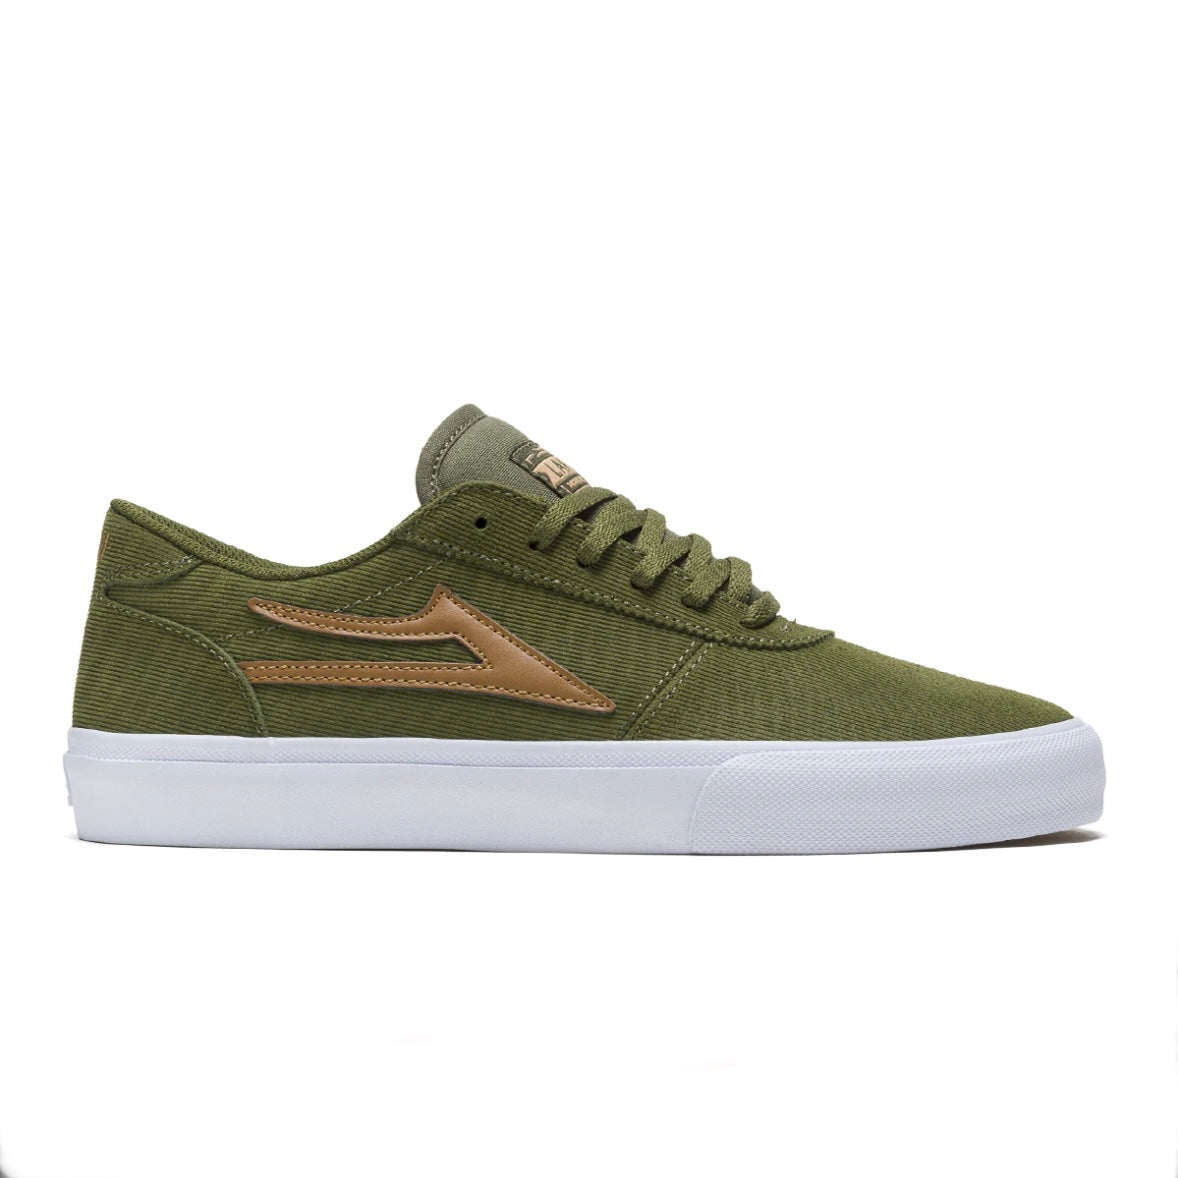 LAKAI MANCHESTER - OLIVE CORD SUEDE